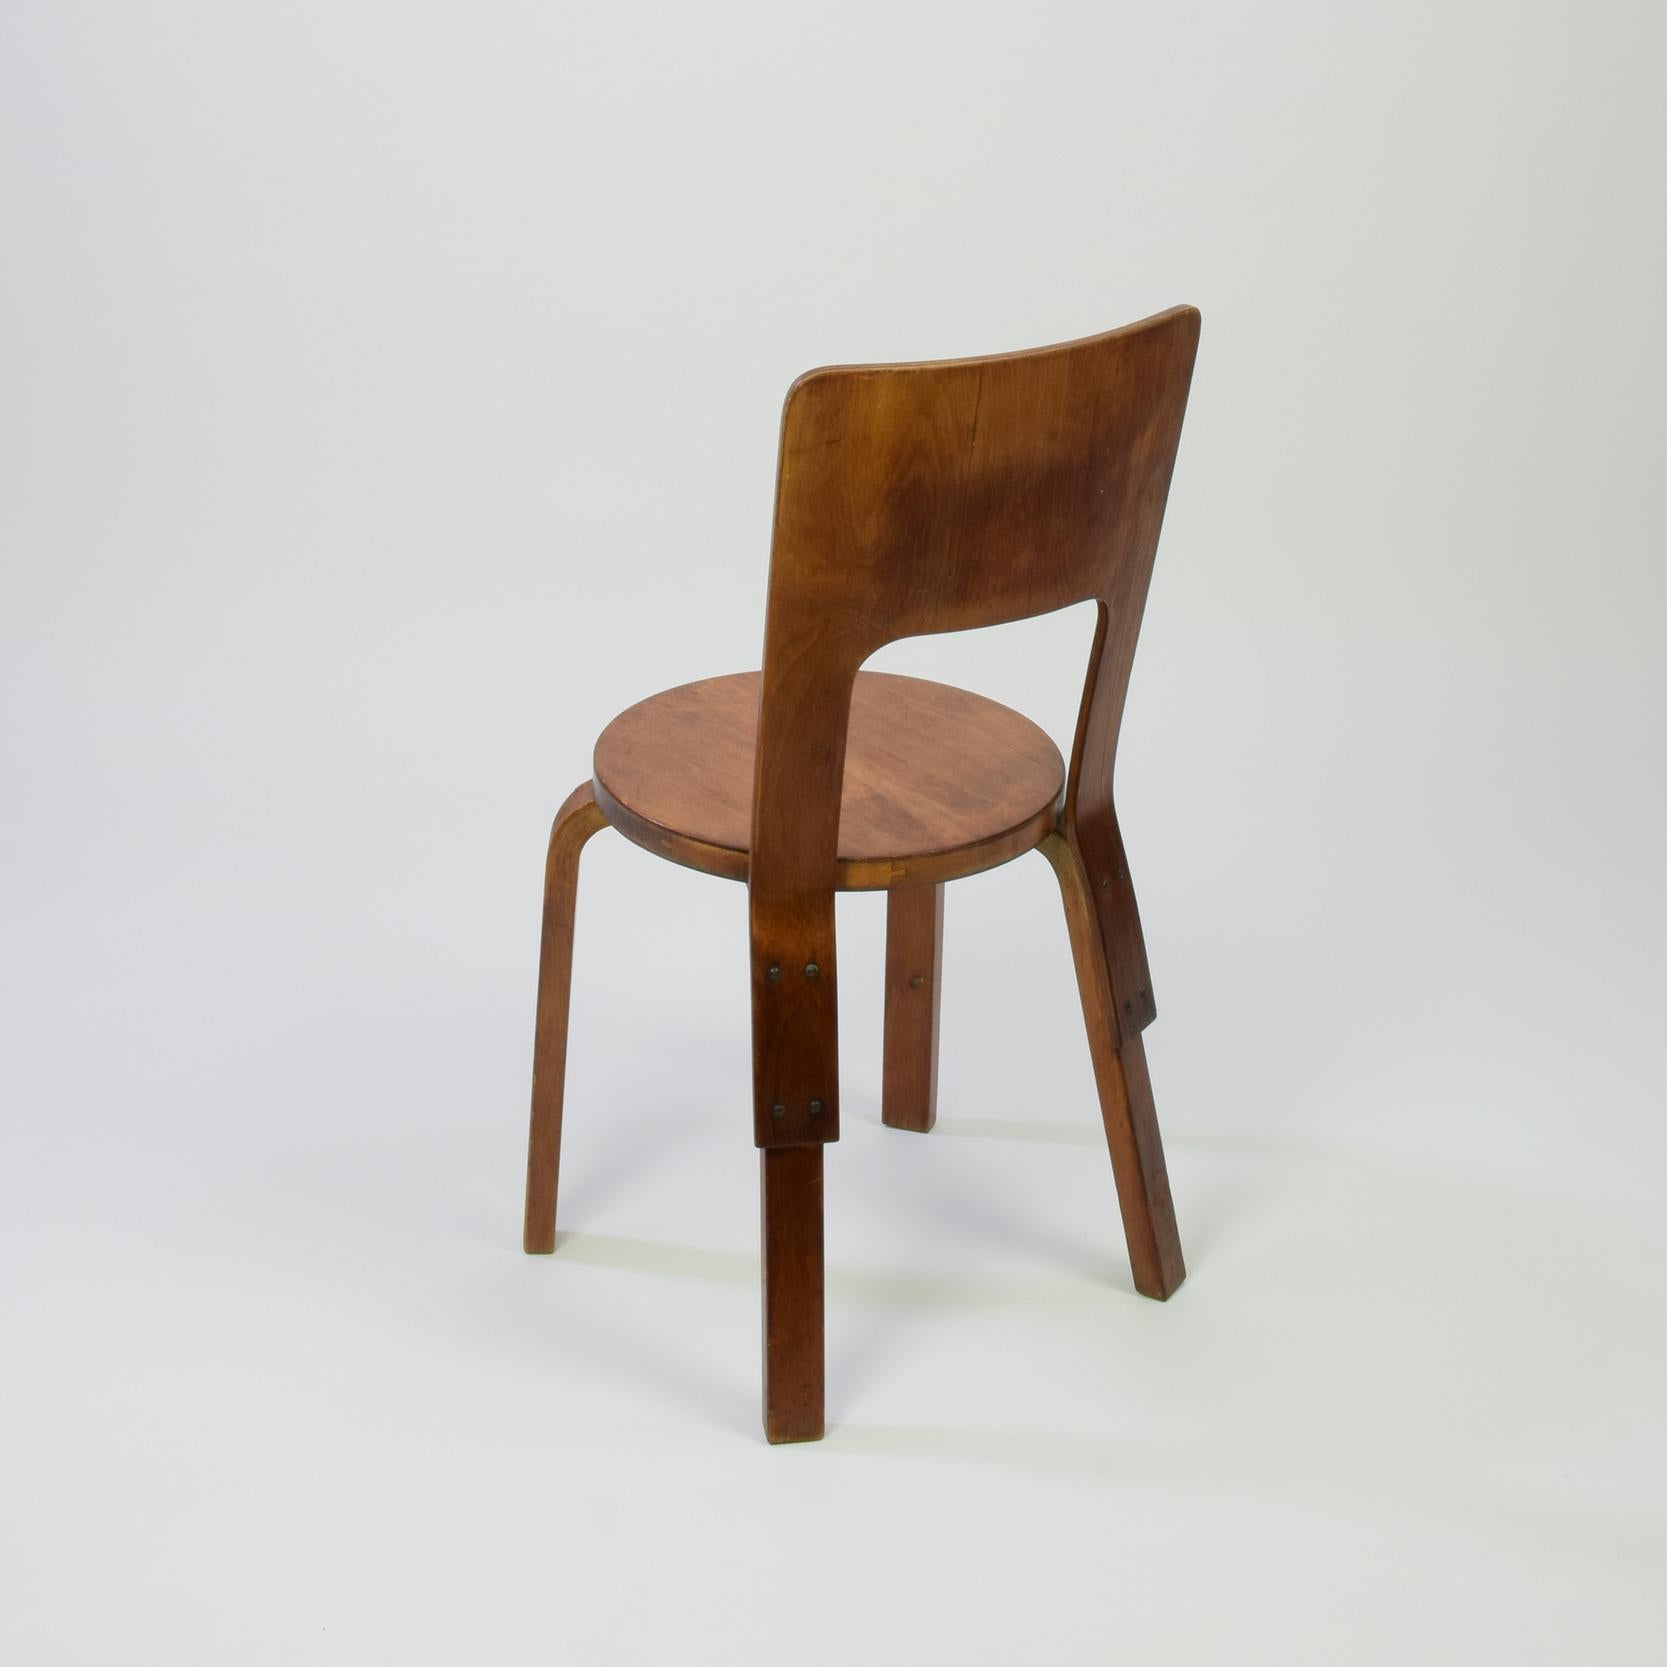 Mid-20th Century Alvar Aalto, Set of 3 Model 66 Chairs, 1933, Original Early Production